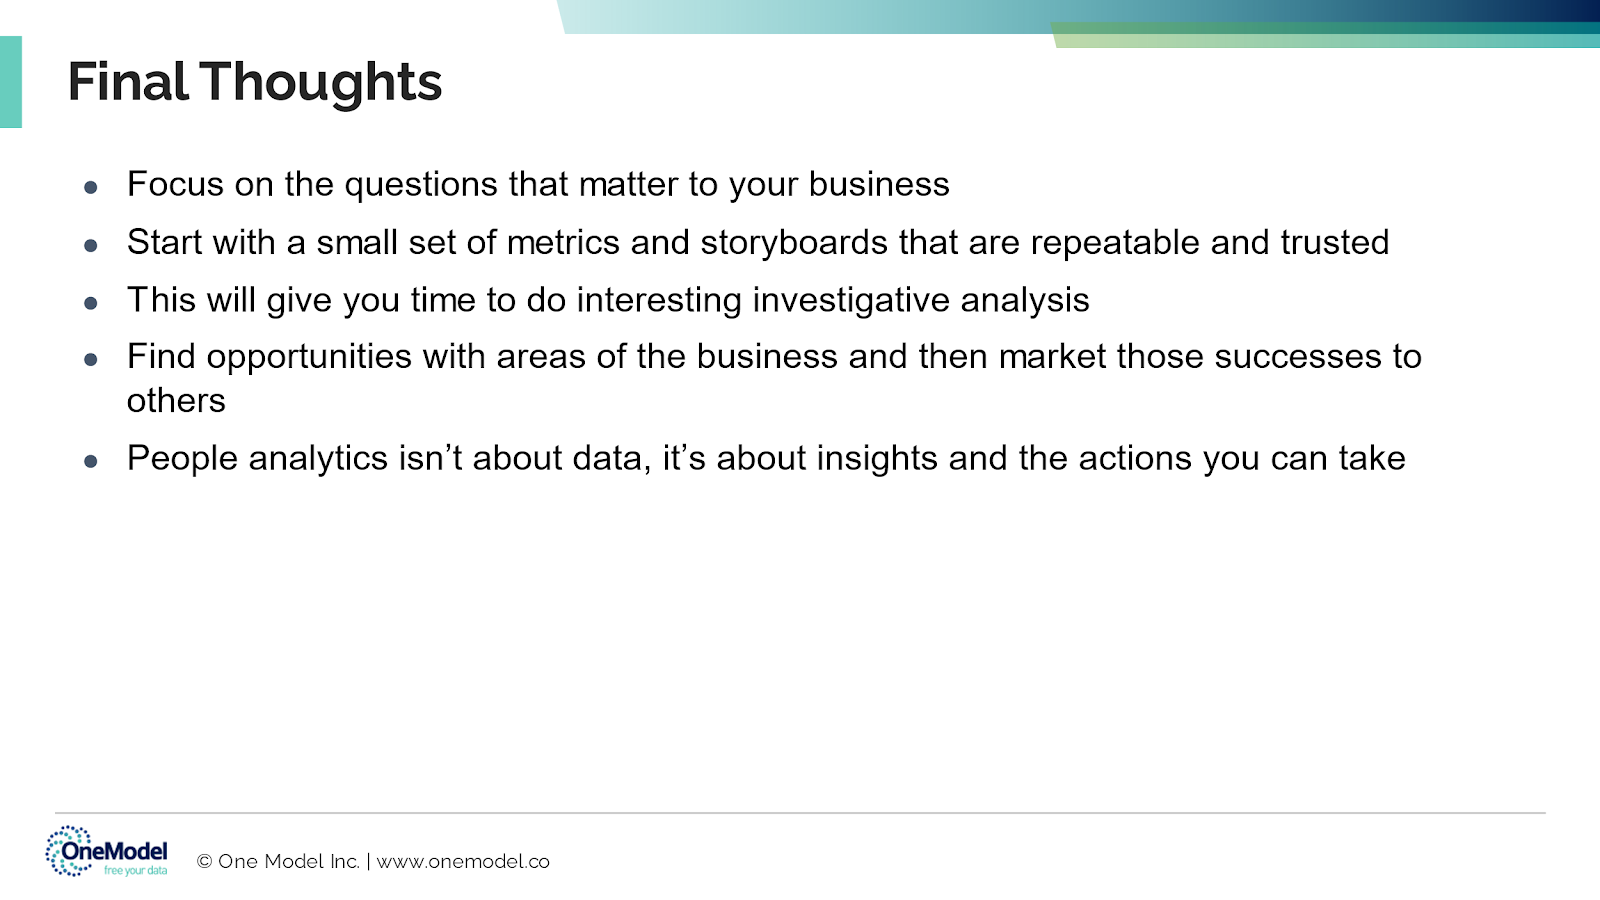 Final thoughts slide